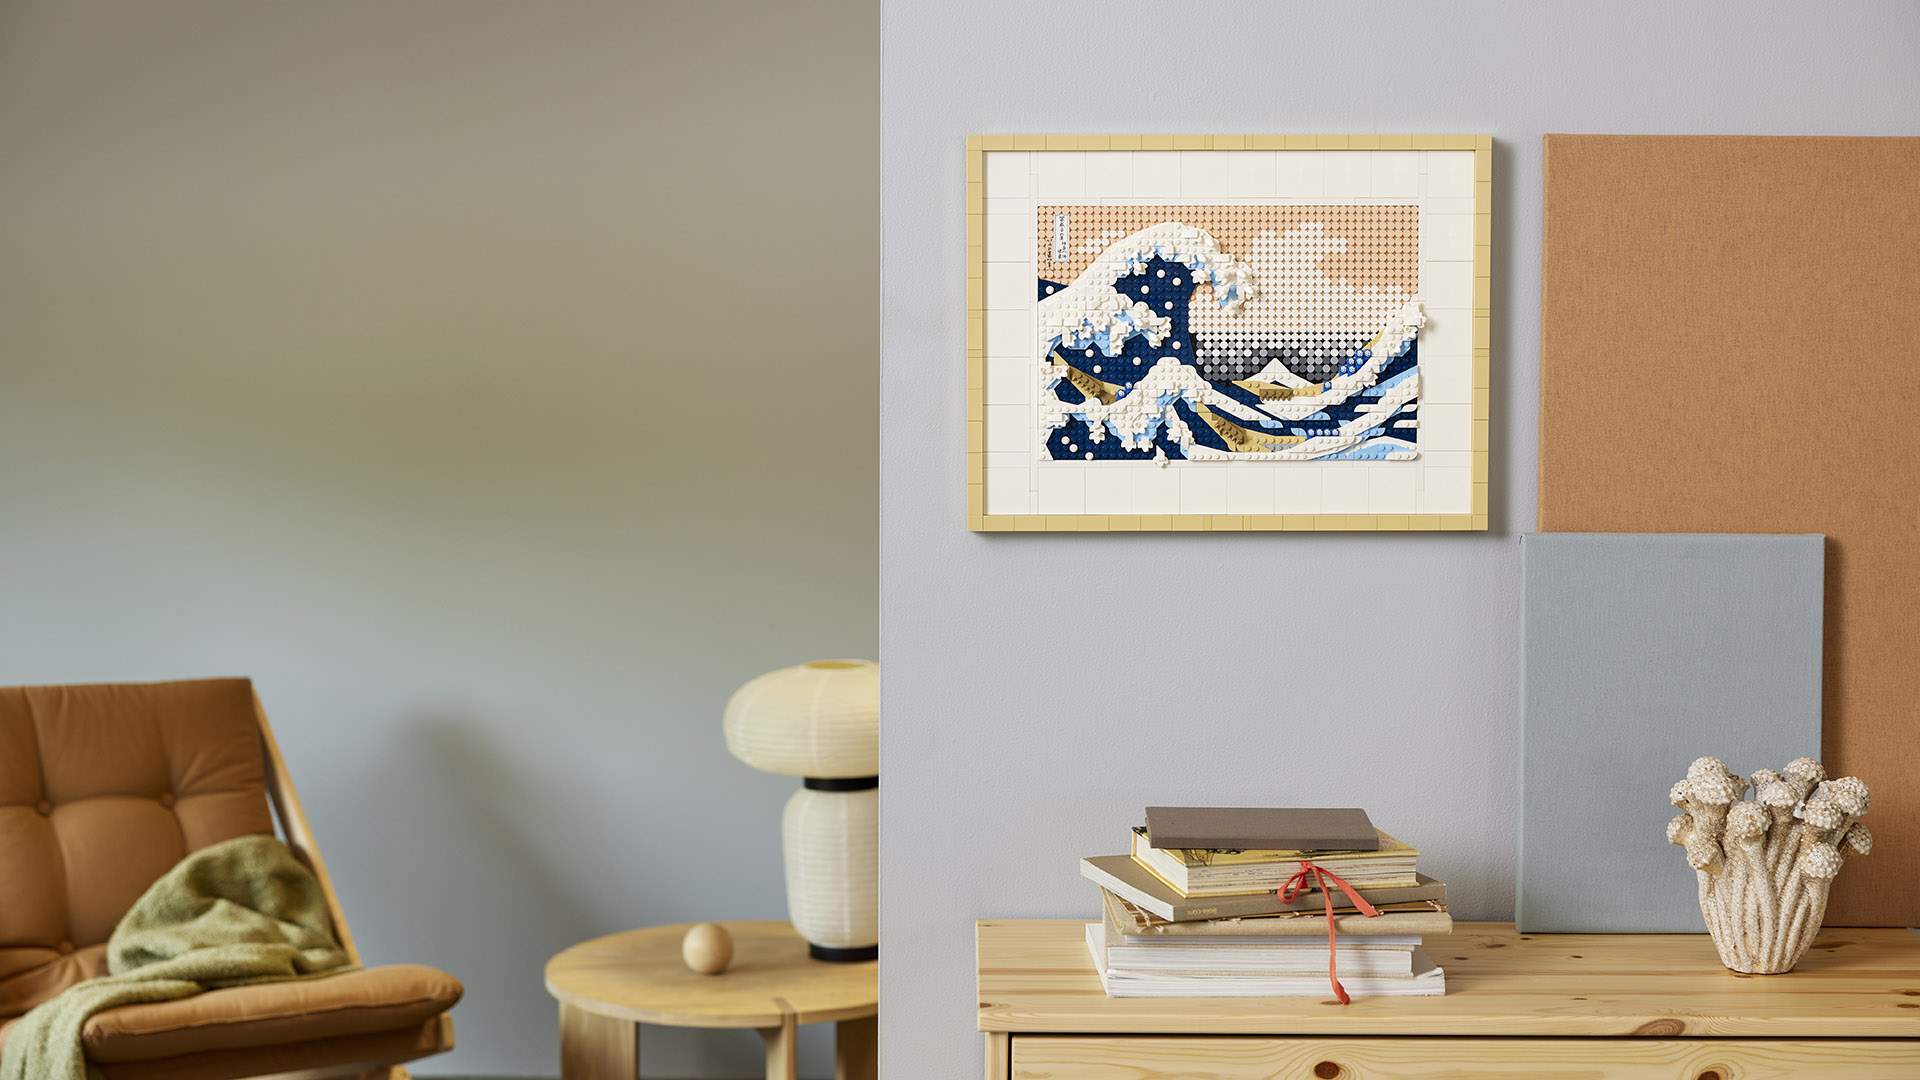 Sculpture Recreates Hokusai's 'Great Wave' in 50,000 LEGO - Asia Trend